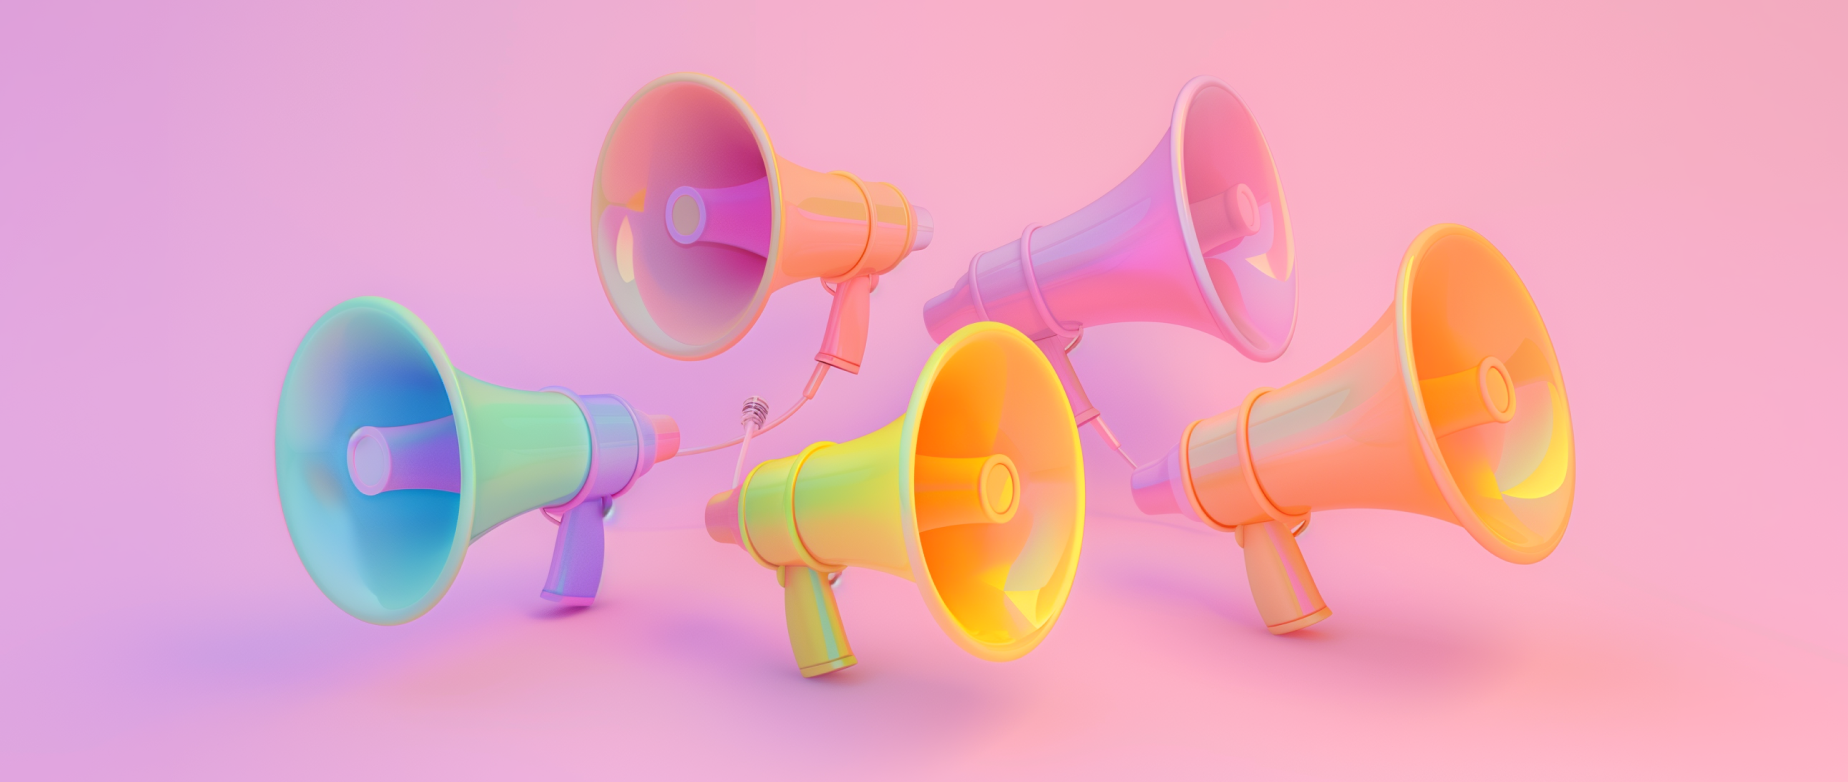 image of megaphones representing the different types of marketing a business could do